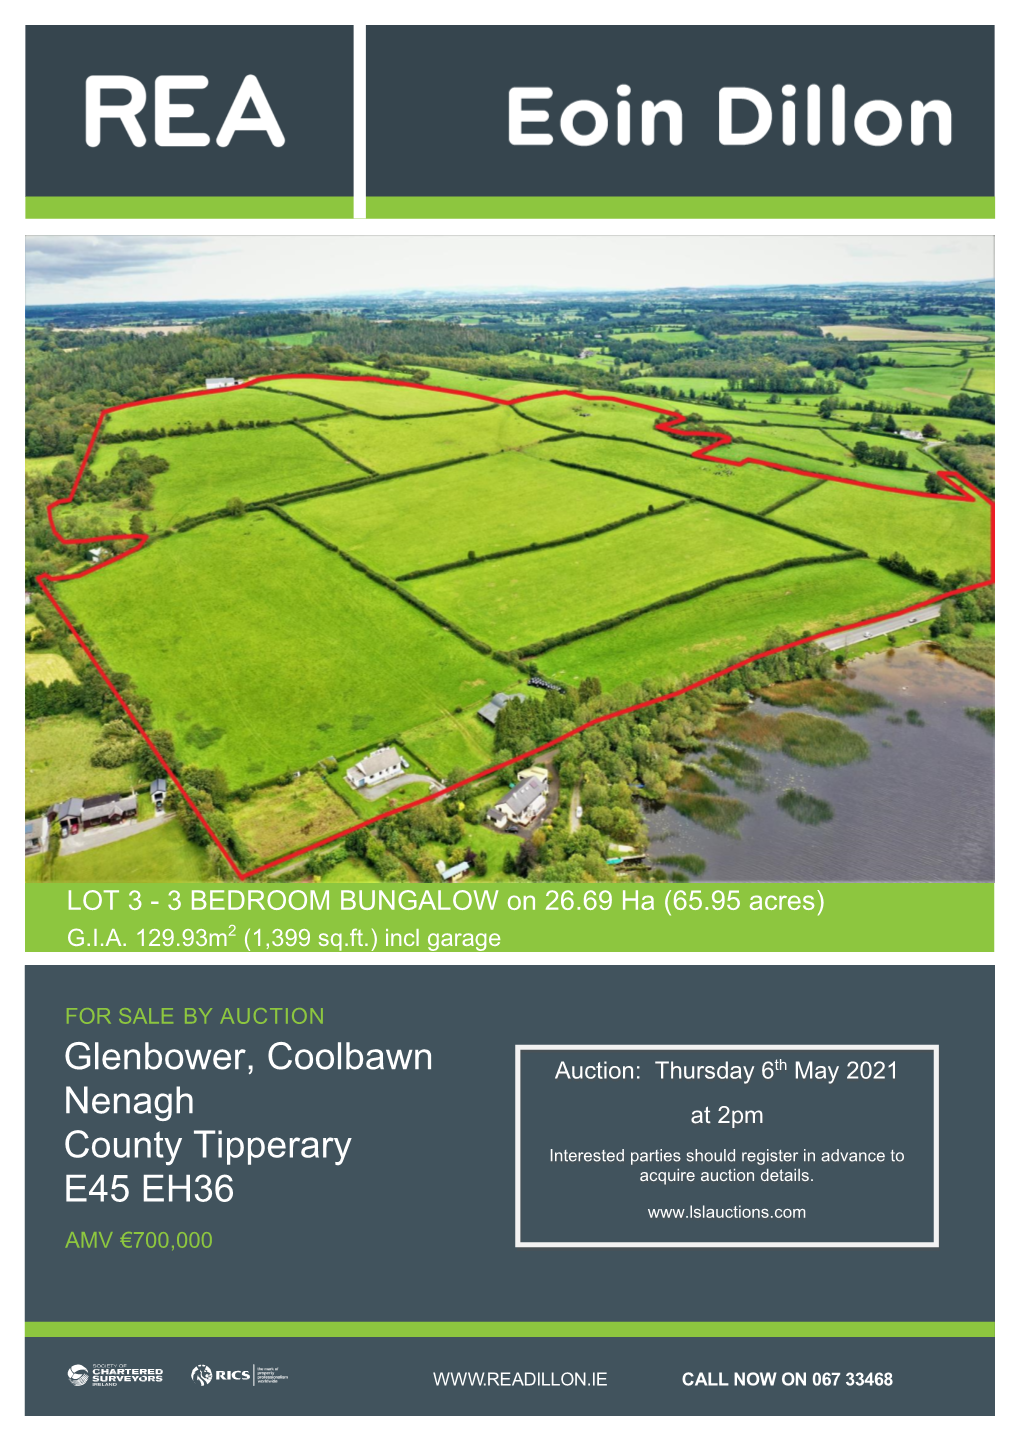 Glenbower, Coolbawn Auction: Thursday 6 May 2021